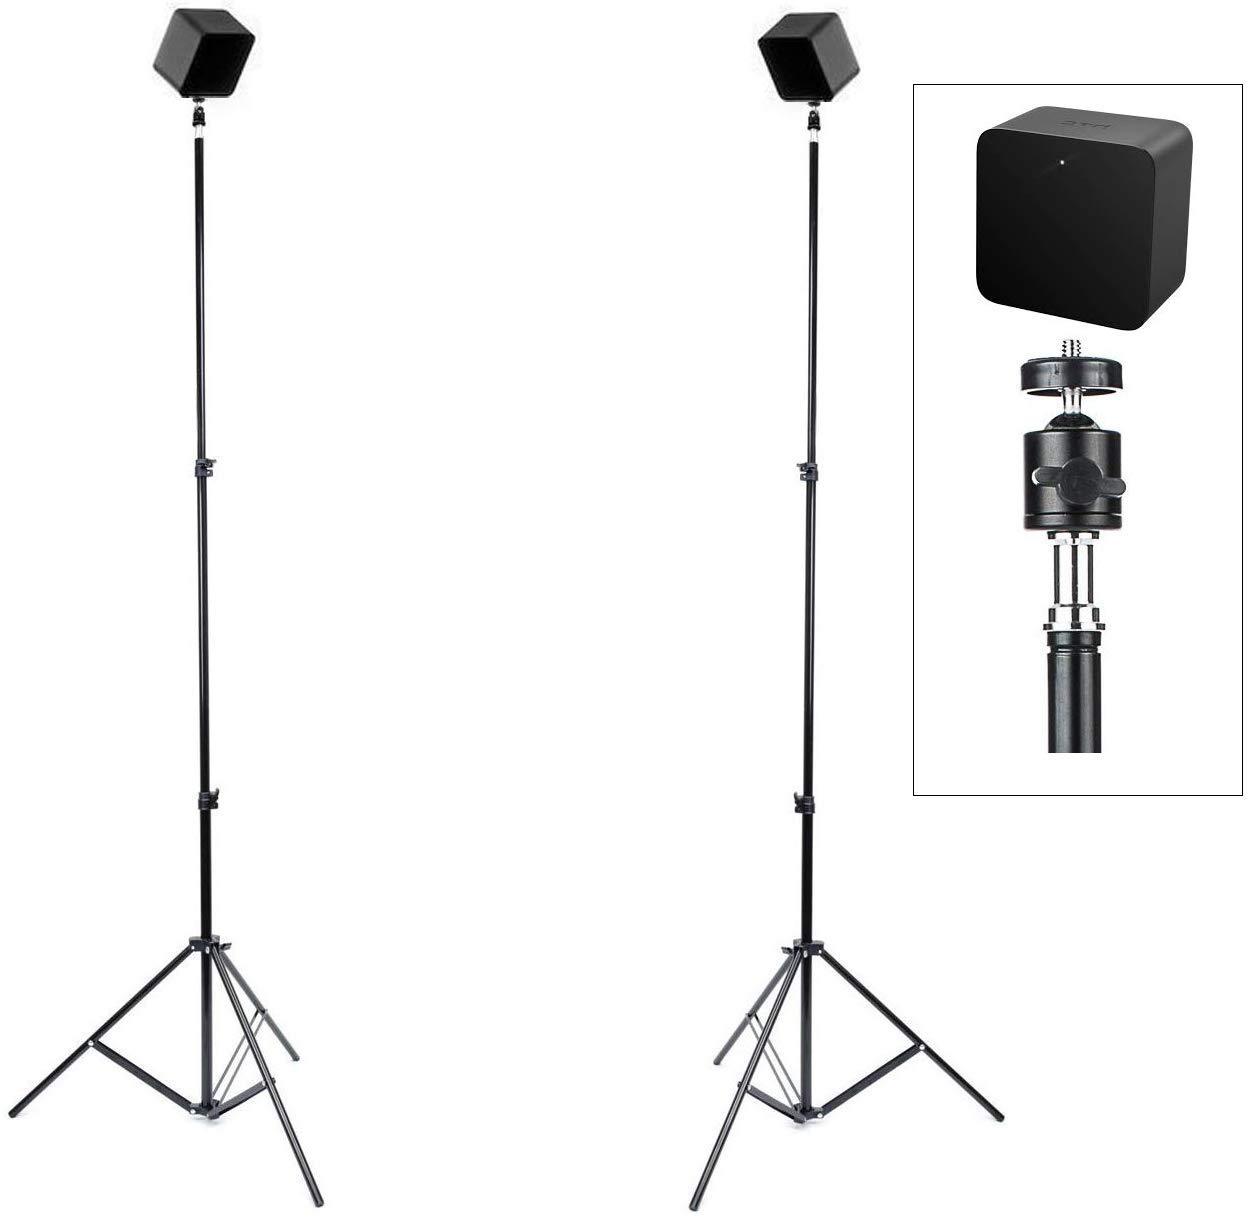 VR Tripod Stand for HTC Vive Base Stations 1.0 and 2.0/ Oculus Rift  Constellation (2-Pack) - Hyperkin - Hyperkin Store